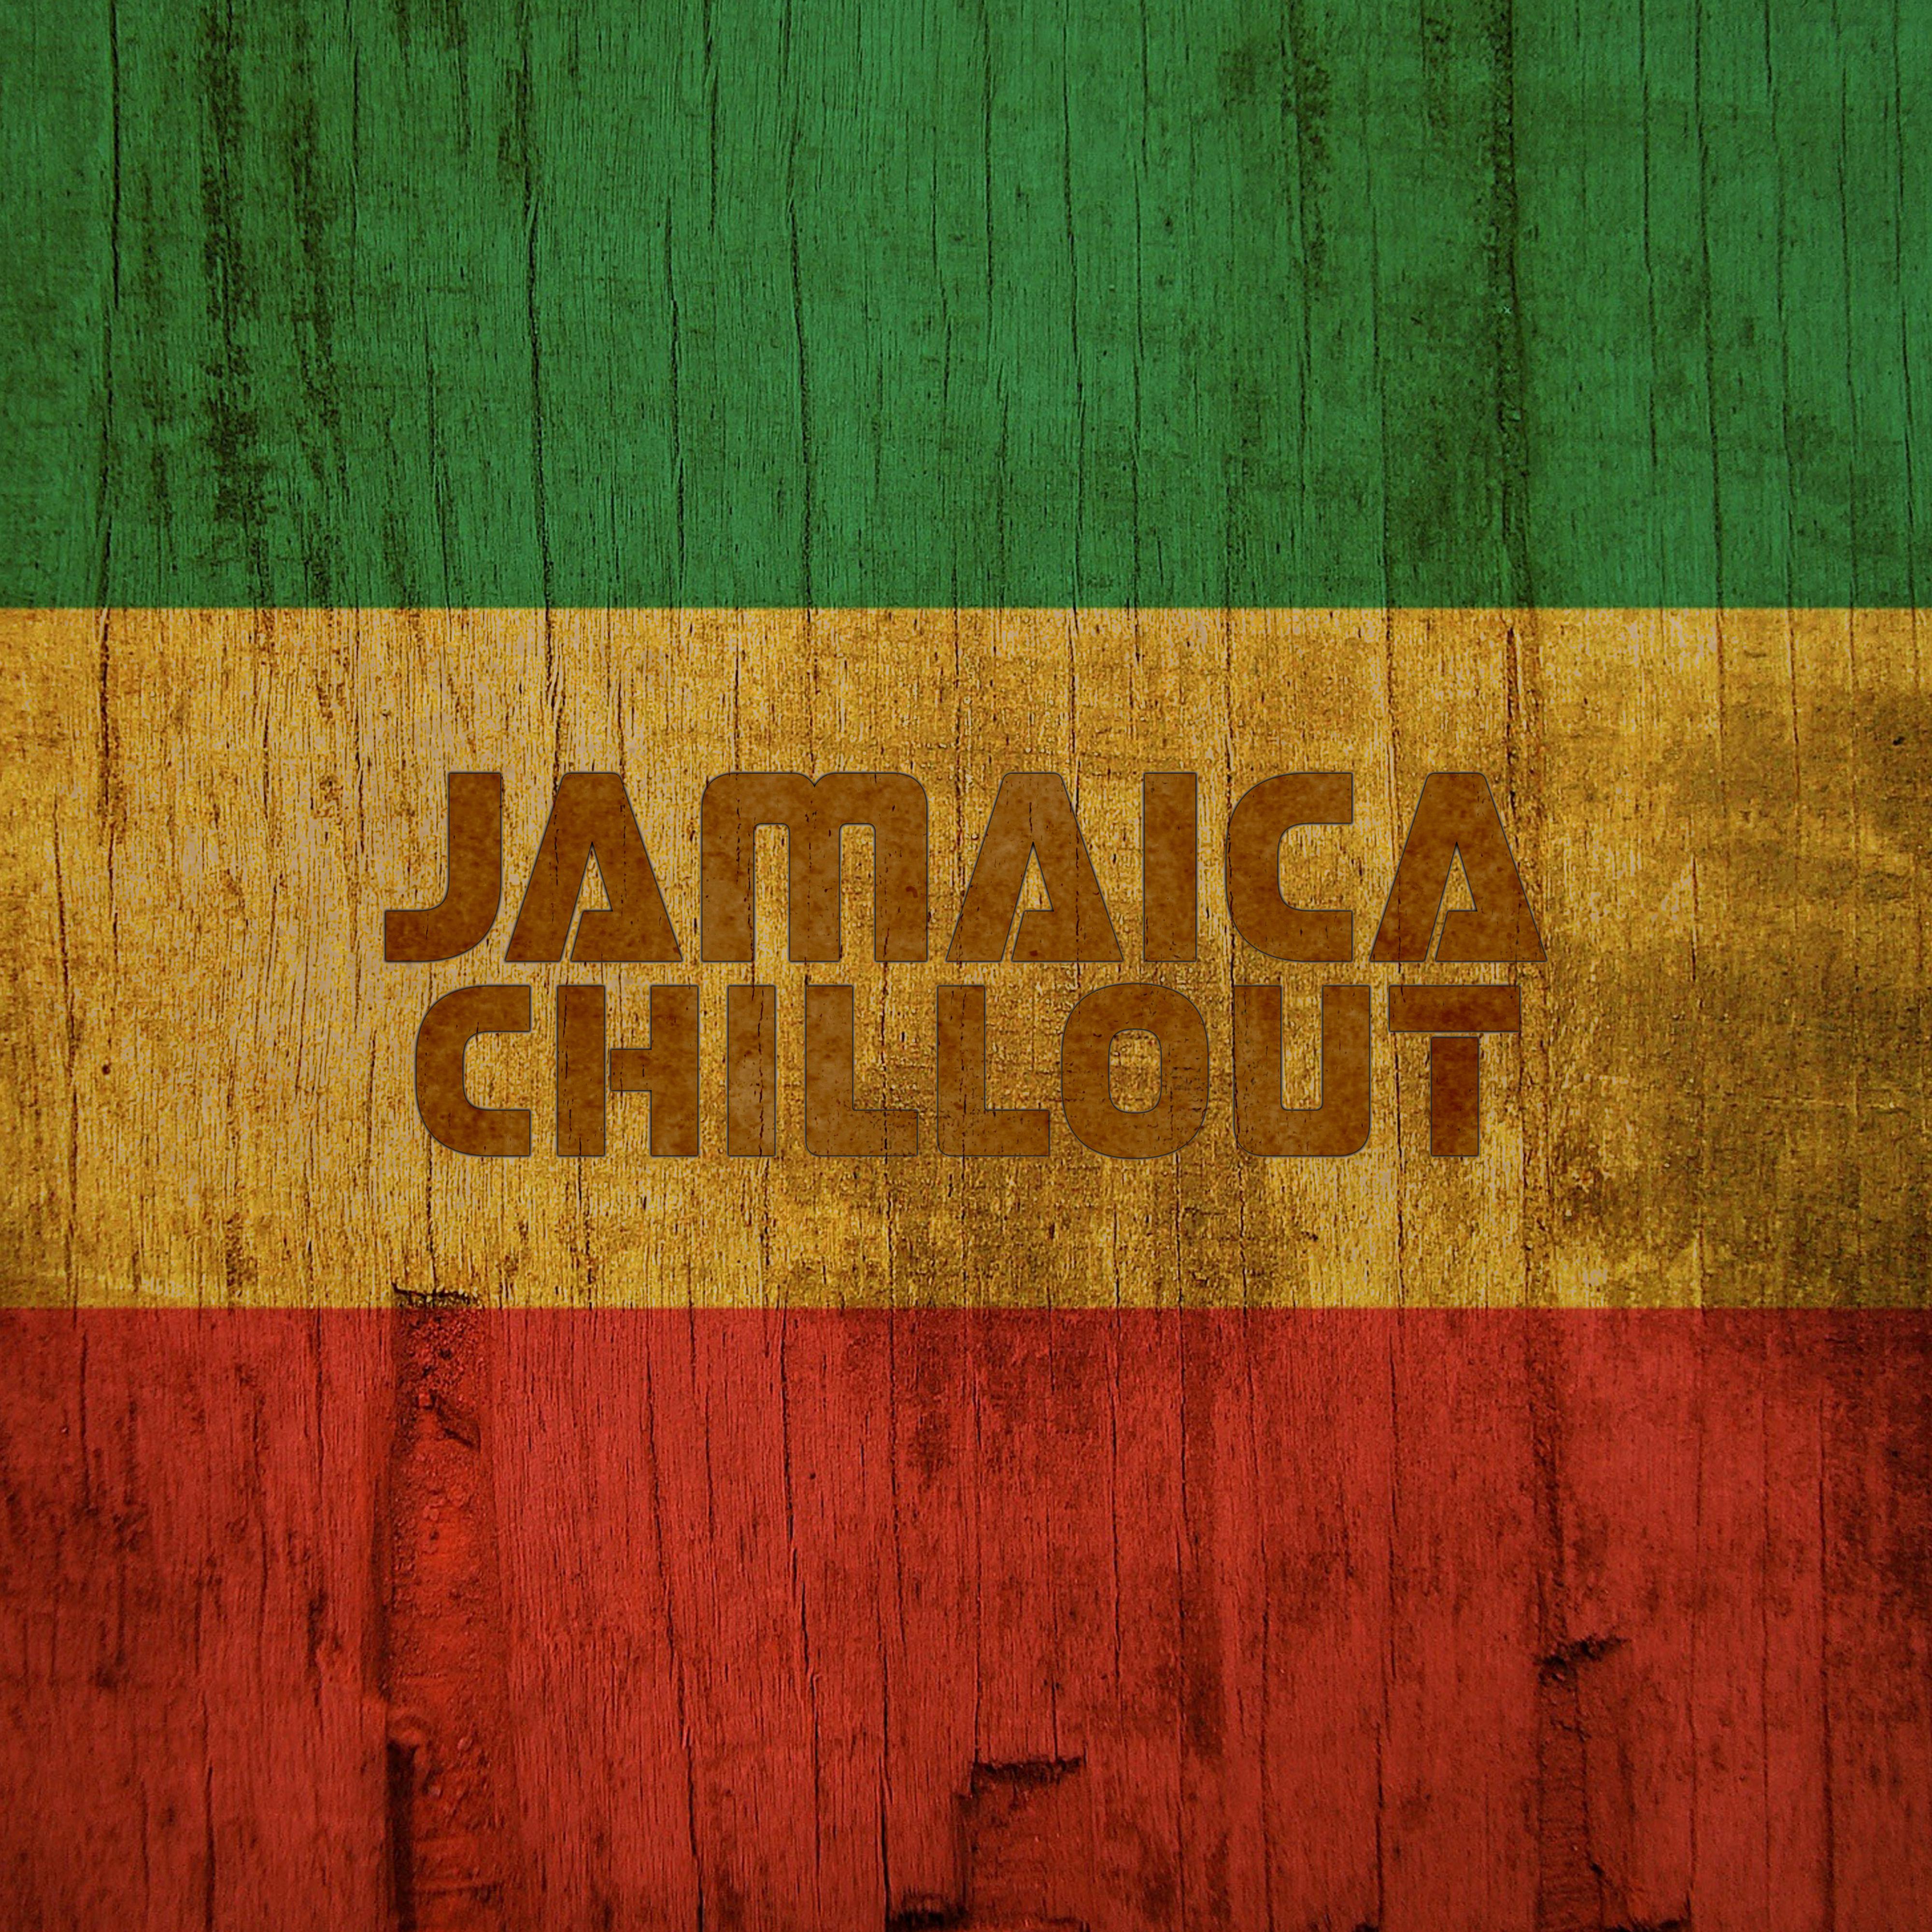 Jamaica Chillout